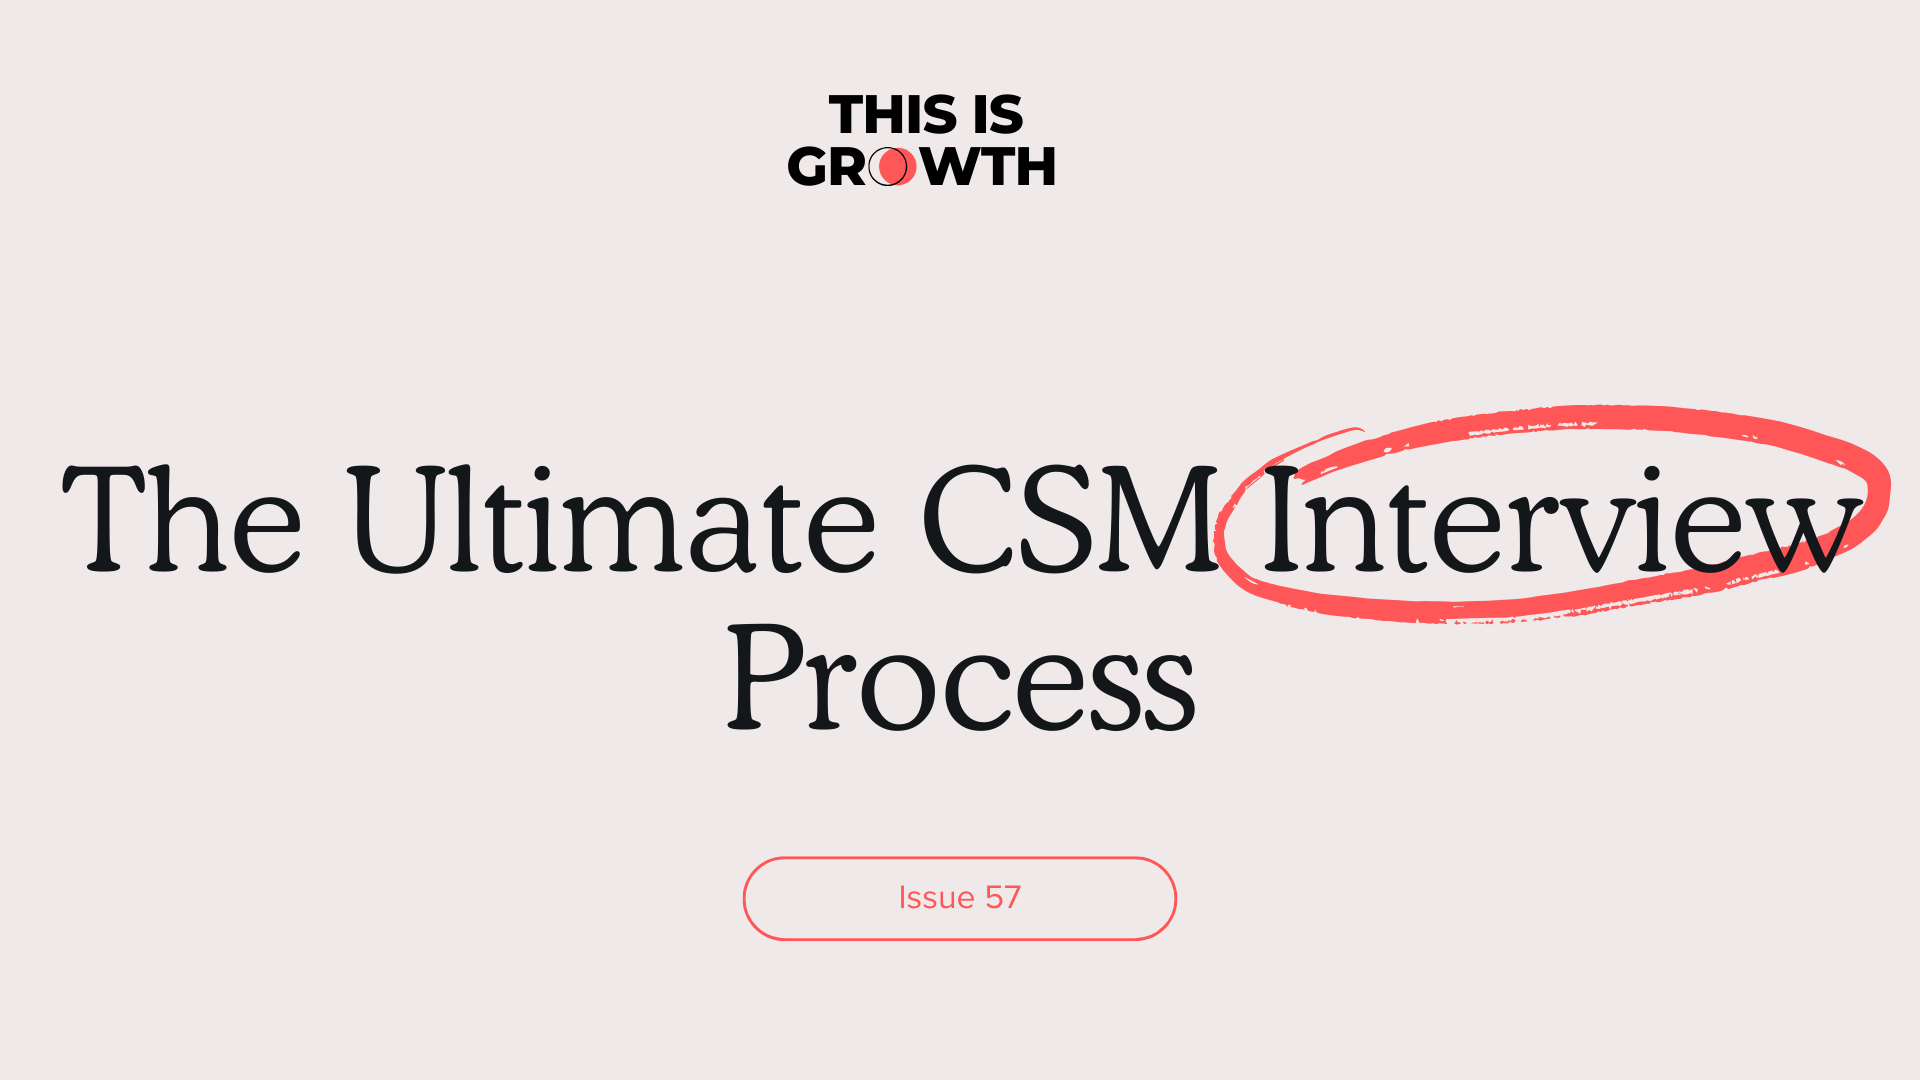 The Ultimate CSM Interview Process